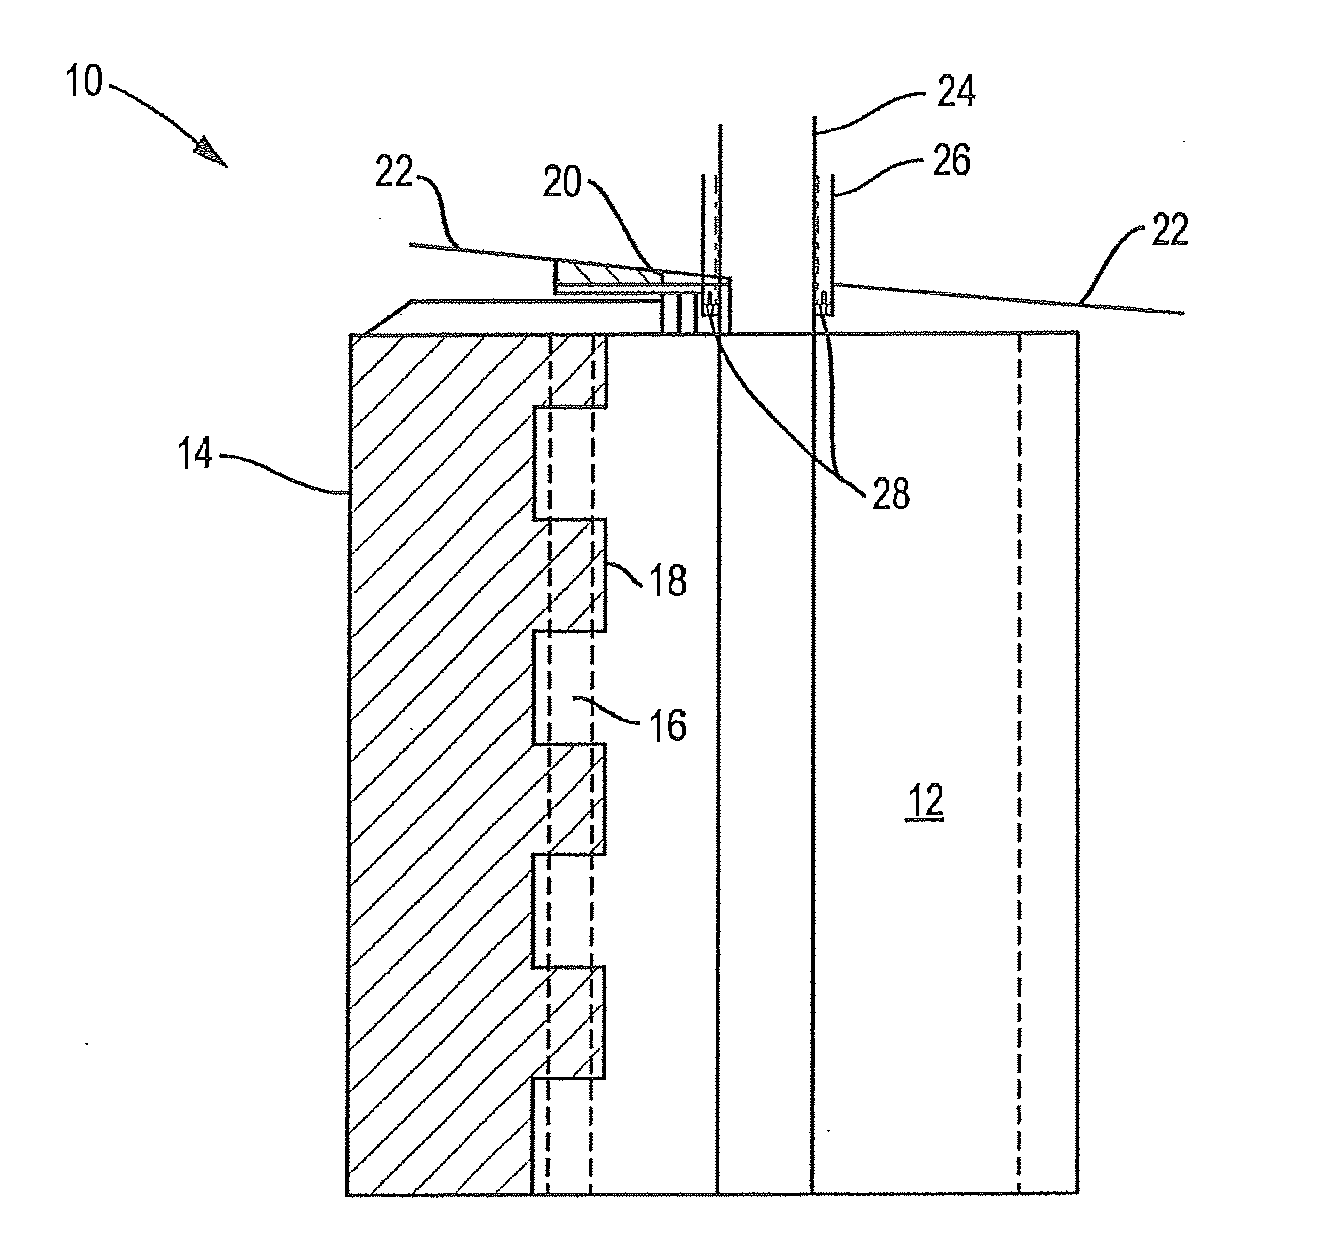 Spring-loaded geared flap structure